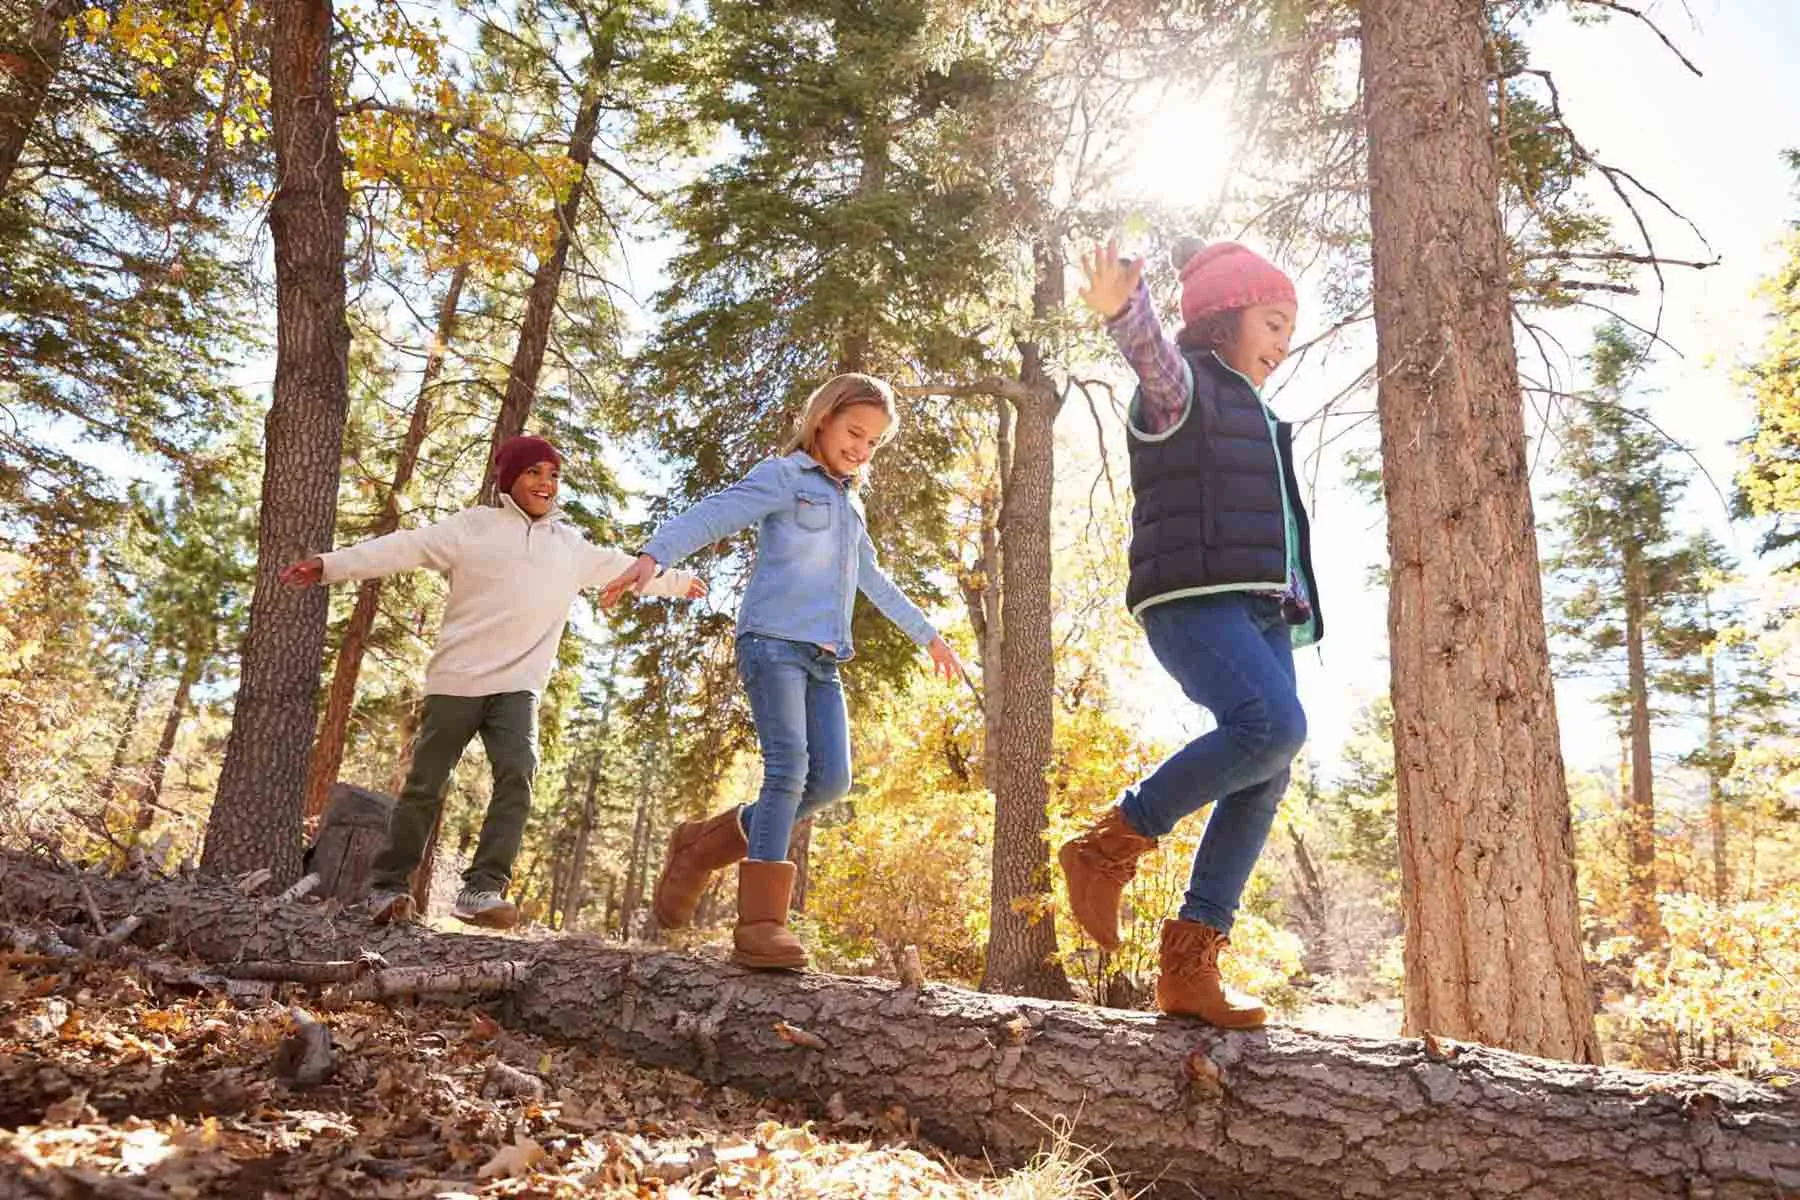 Three children balancing and walking along on a felled tree trunk in the woods.